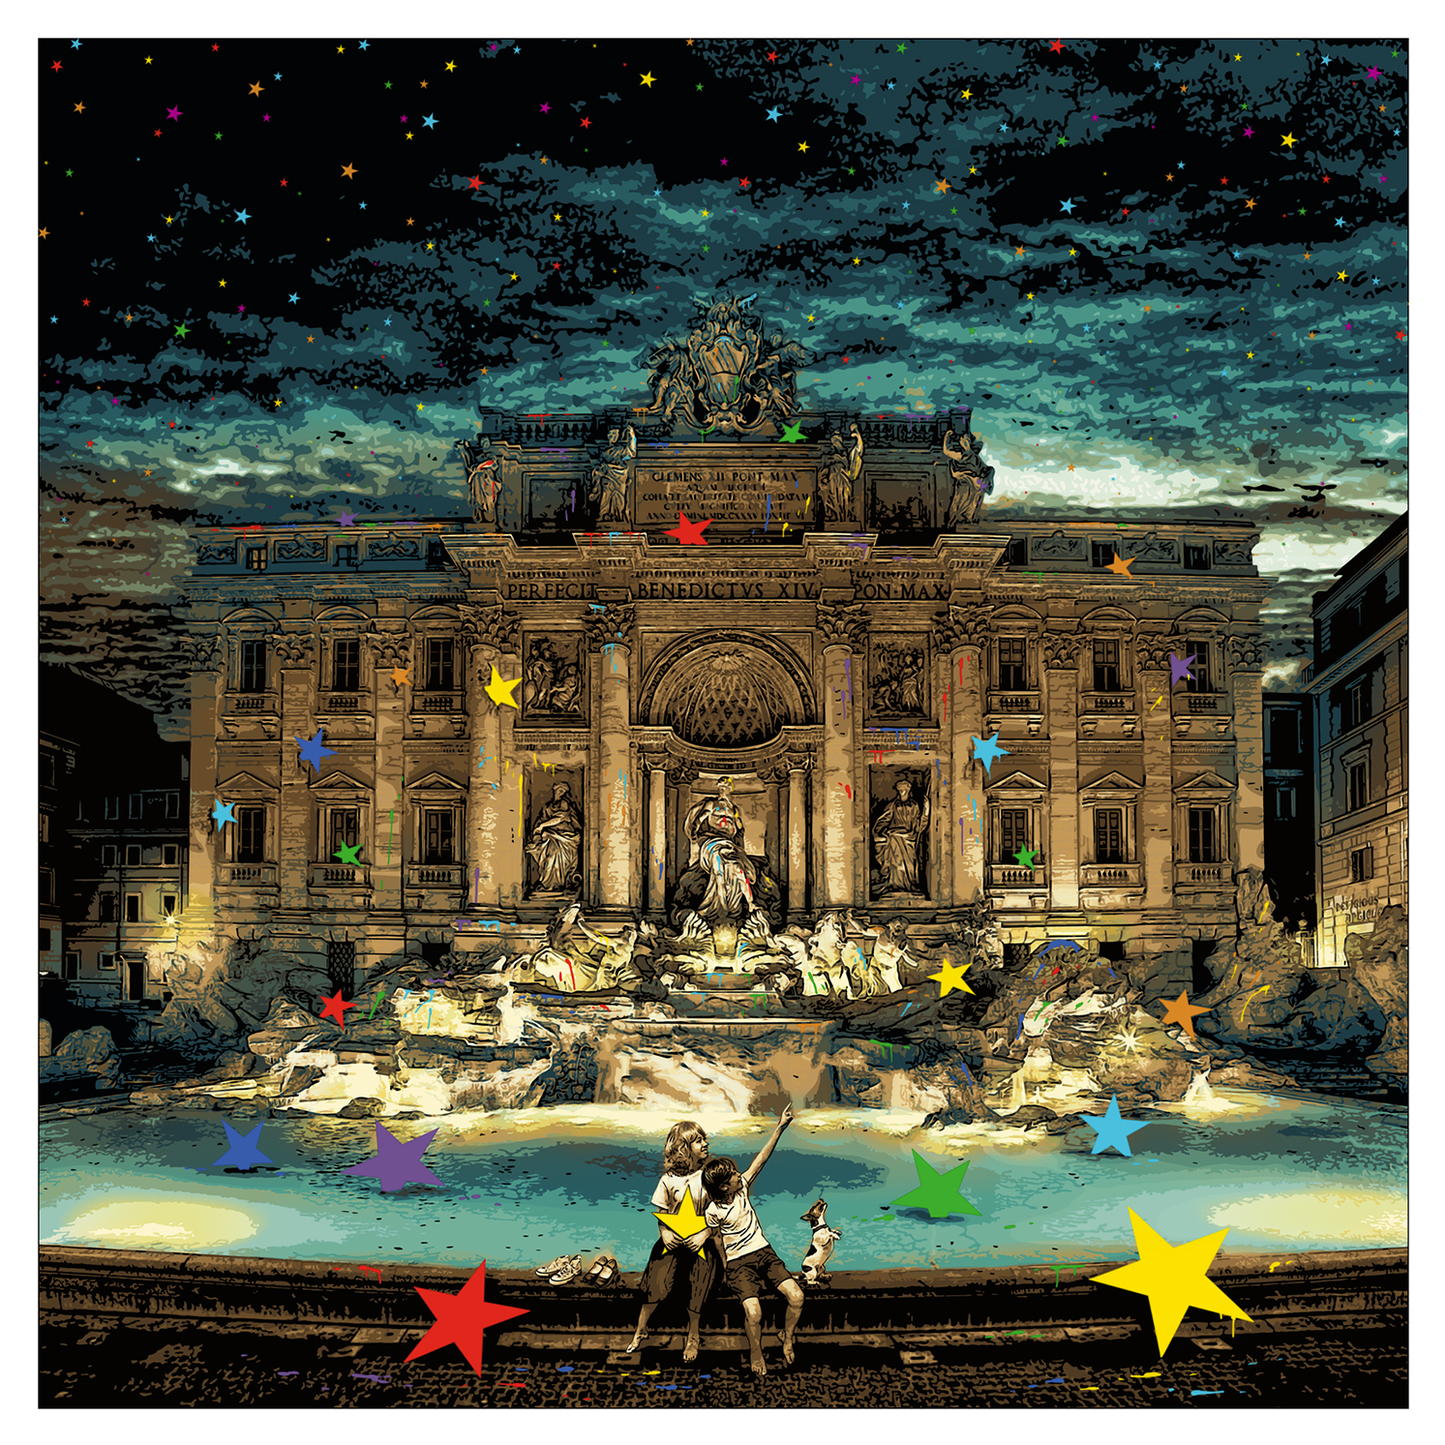 Roamcouch "When You Wish Upon A Star - Trevi"